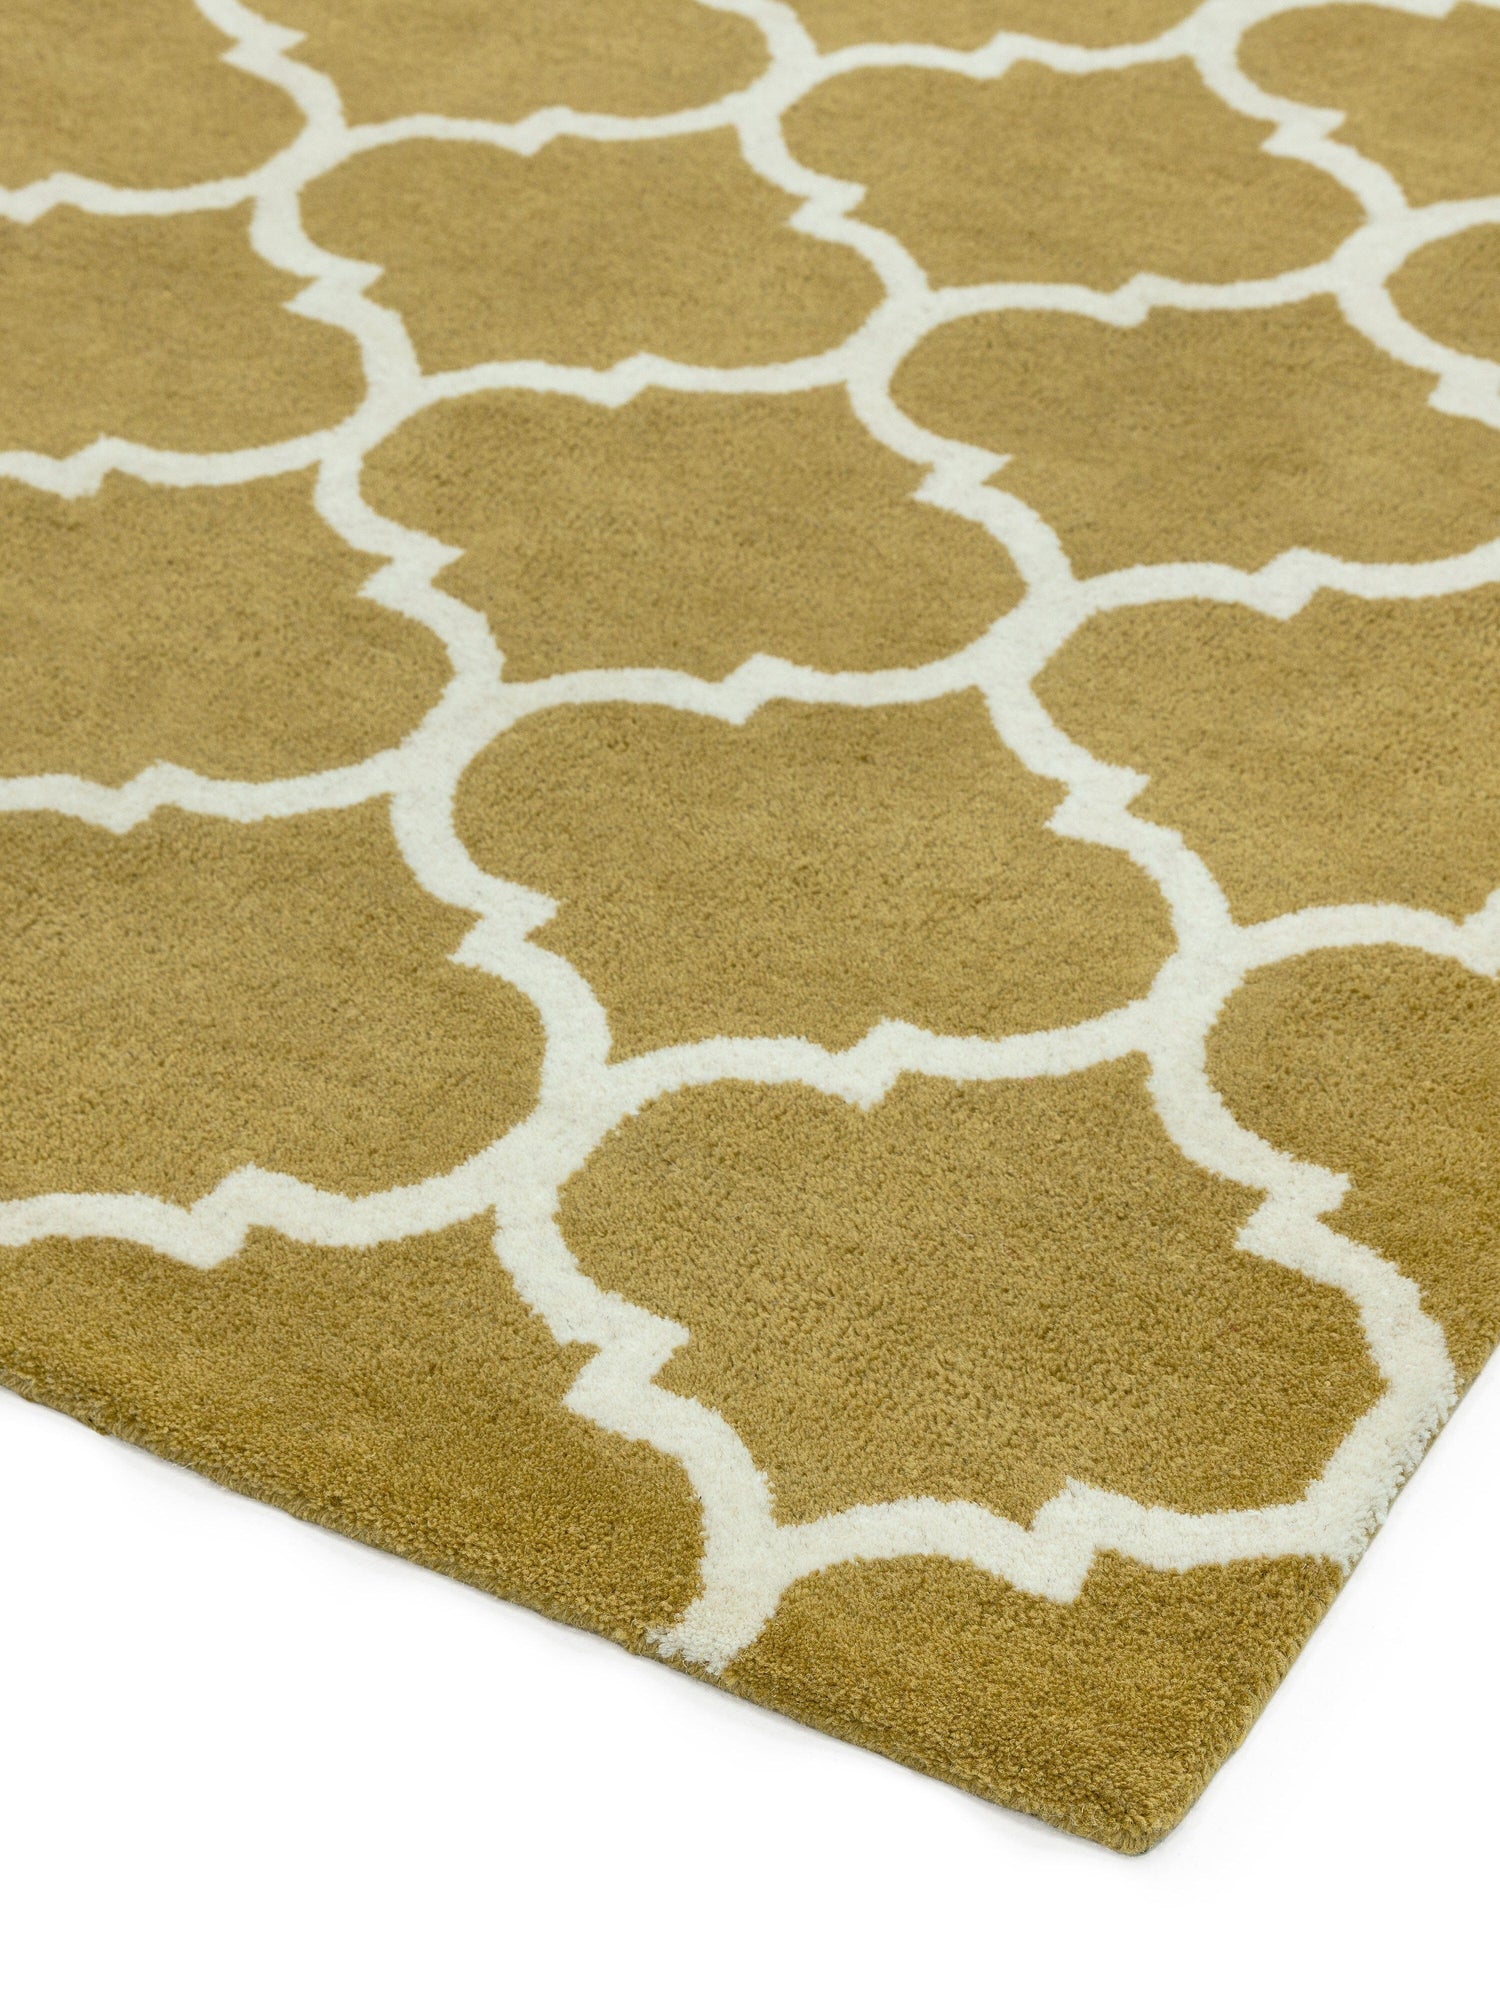  Asiatic Carpets-Asiatic Carpets Albany Handtufted Rug Ogee Ochre - 80 x 150cm-Yellow, Gold 469 